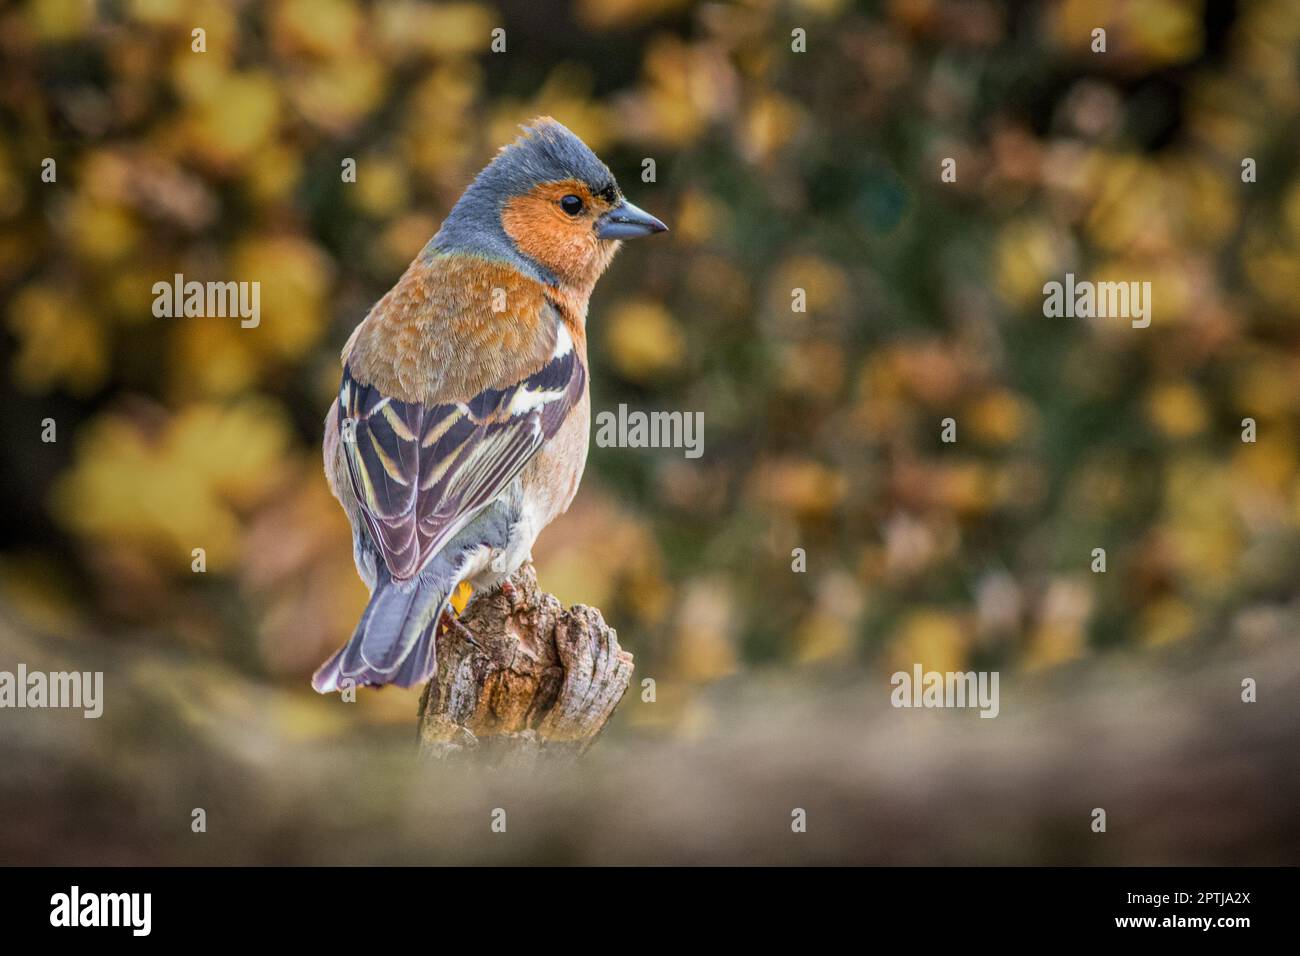 A close up of a male chaffinch, fringilla coelebs, as he perches on an old branch. He is taken against an out of focus yellow gorse background Stock Photo